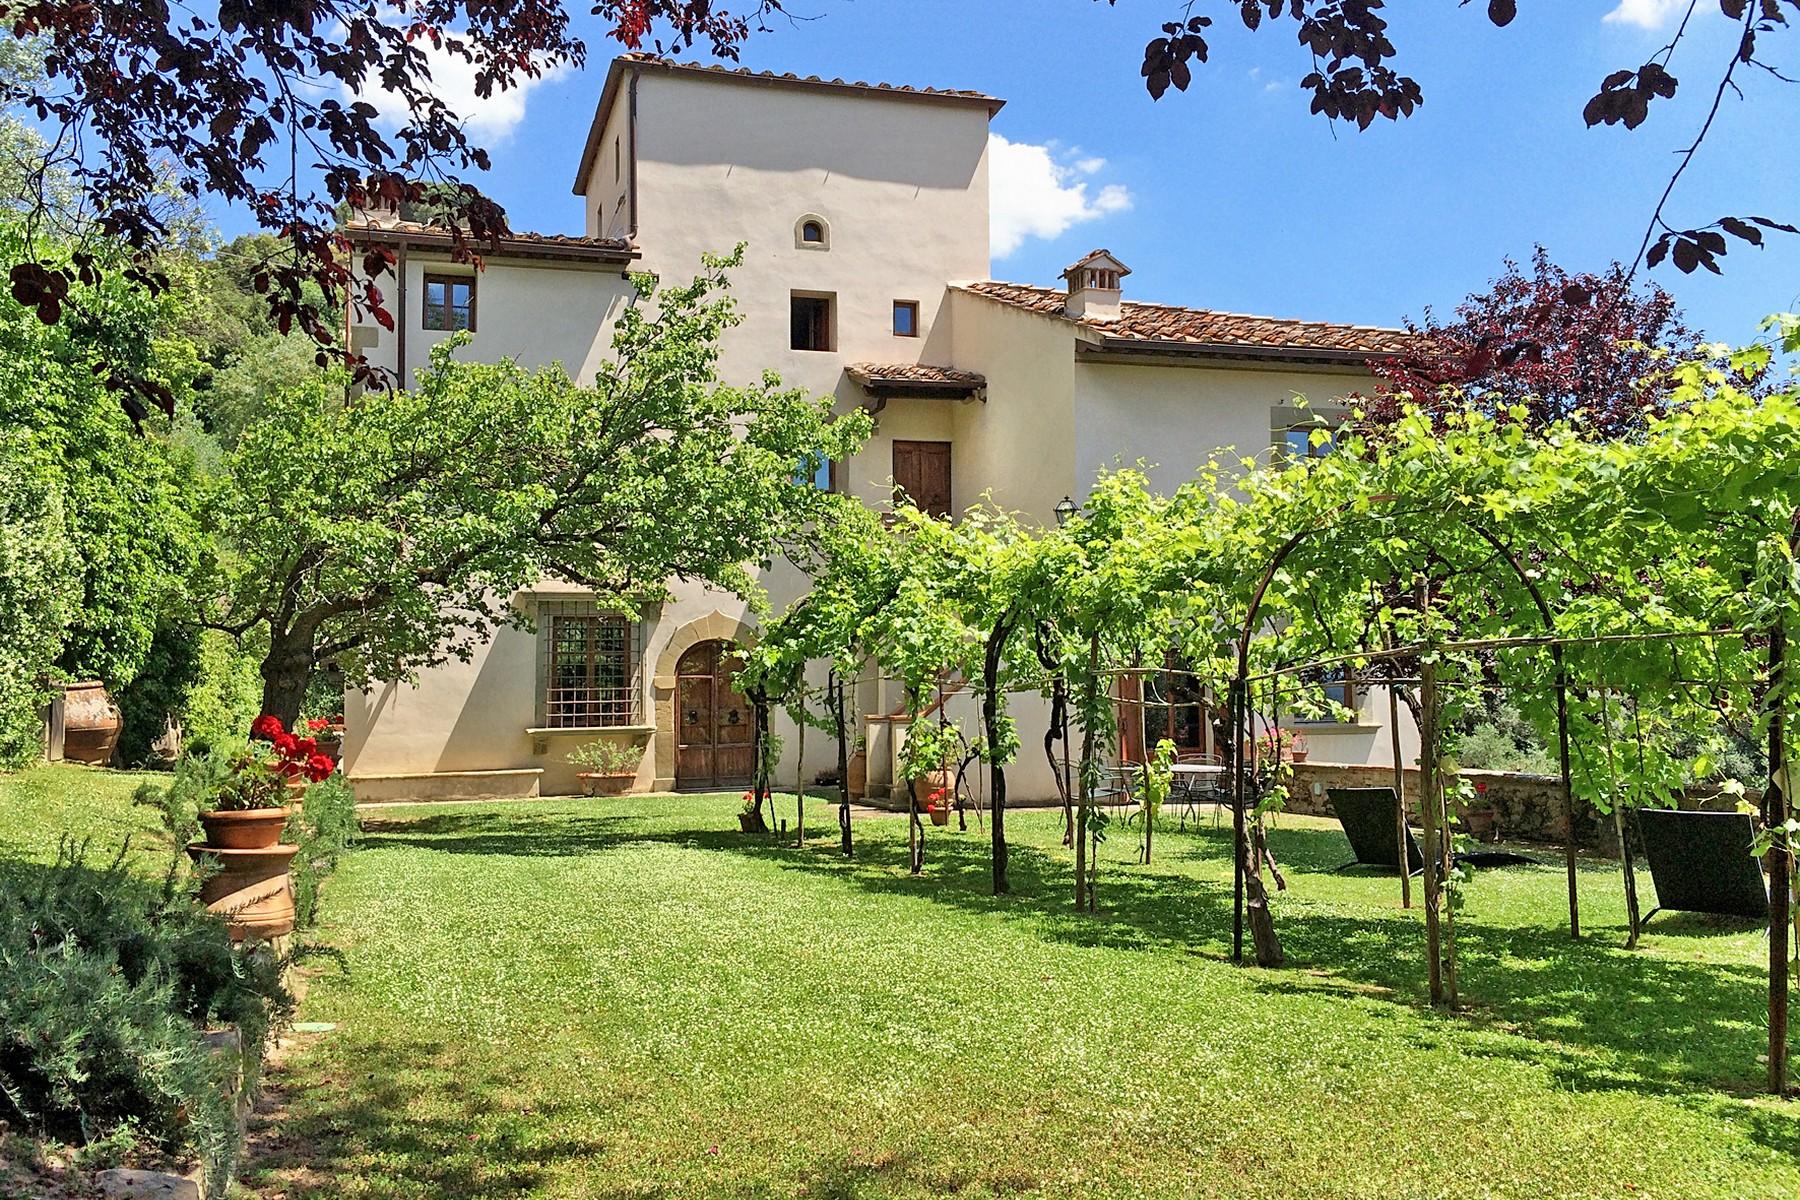 Marvellous villa with pool on the hills of Florence - 5